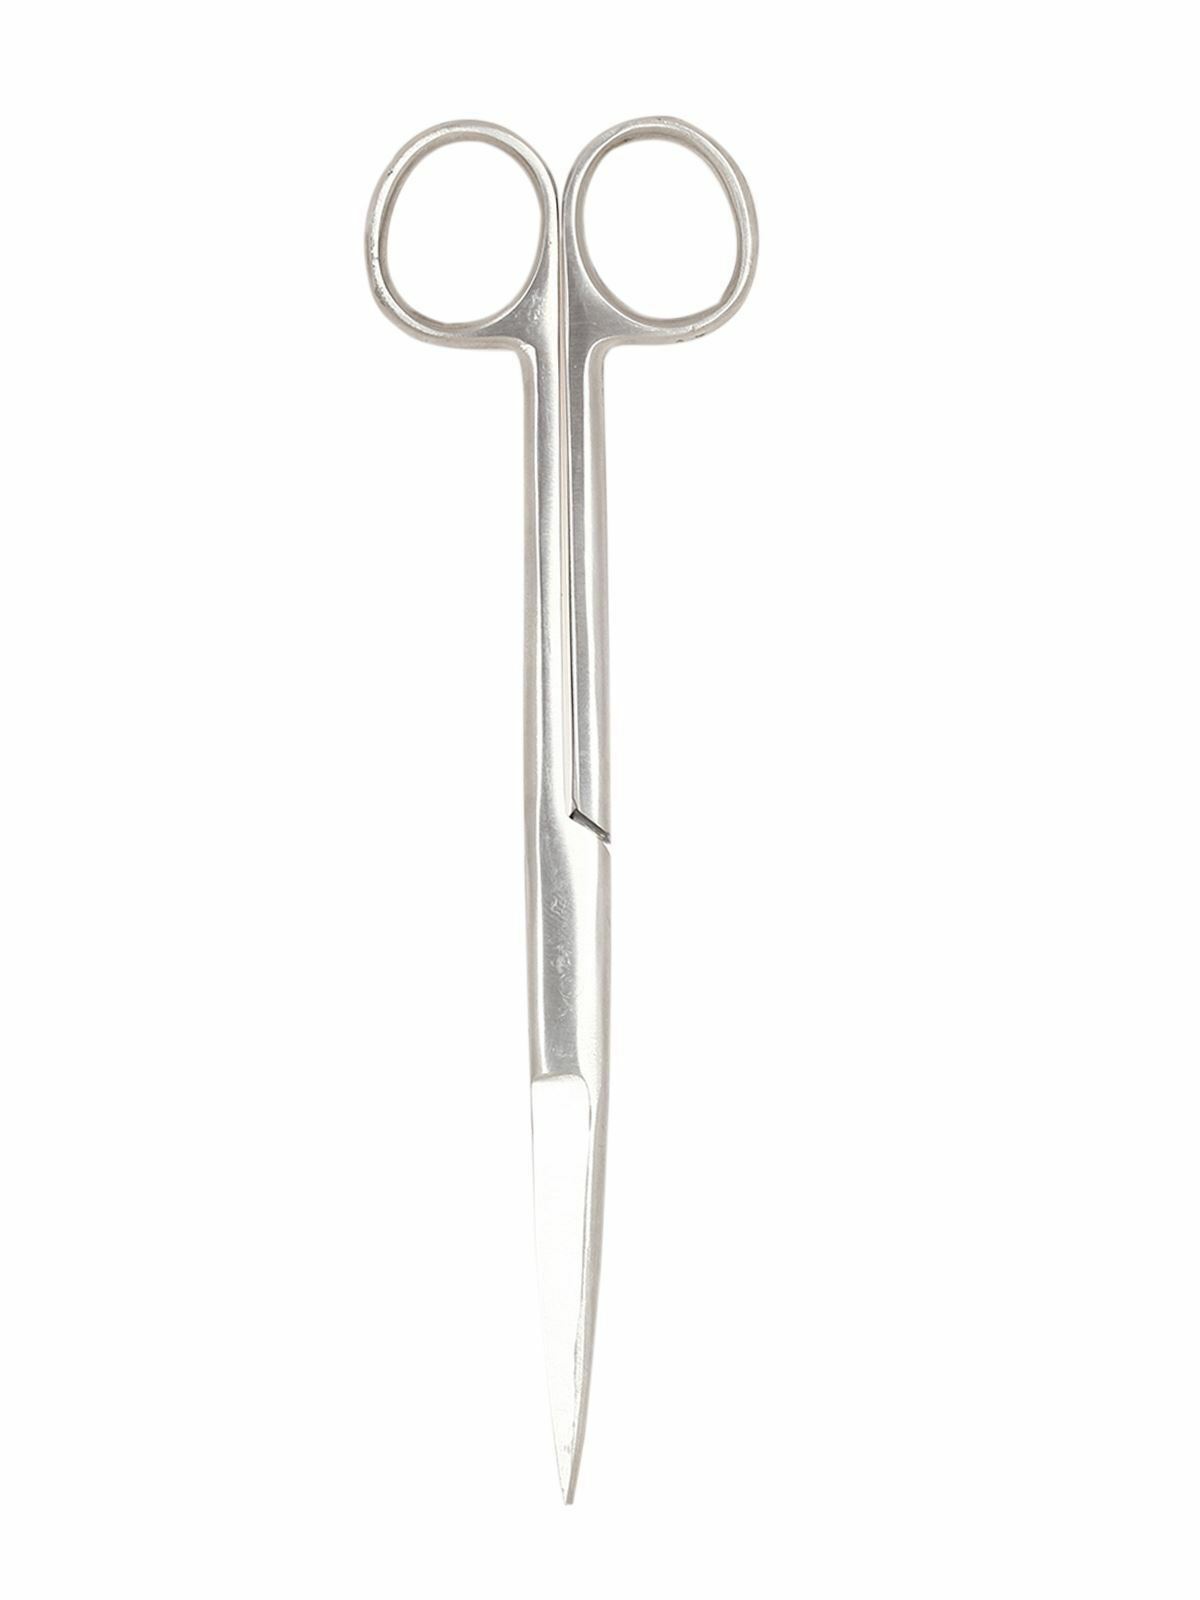 Microsidd Fine Surgical Dissecting Scissor 8 inches Straight ( both sharp blades) Imported